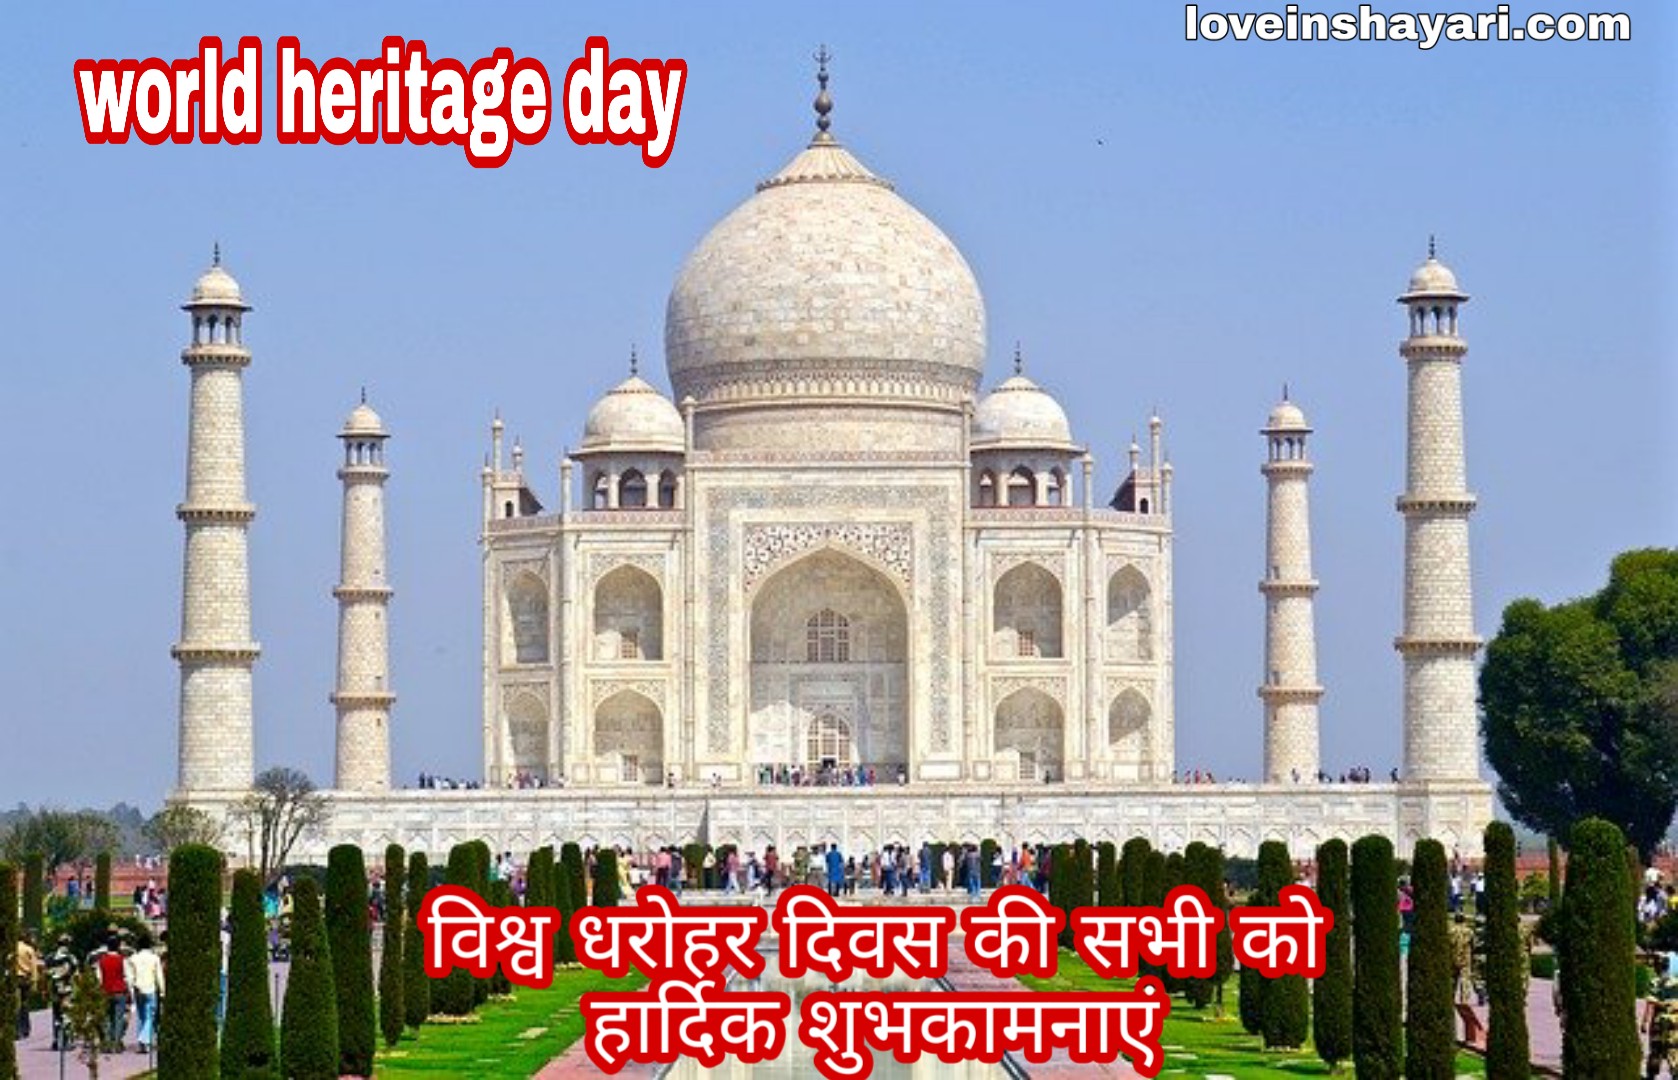 World heritage day images